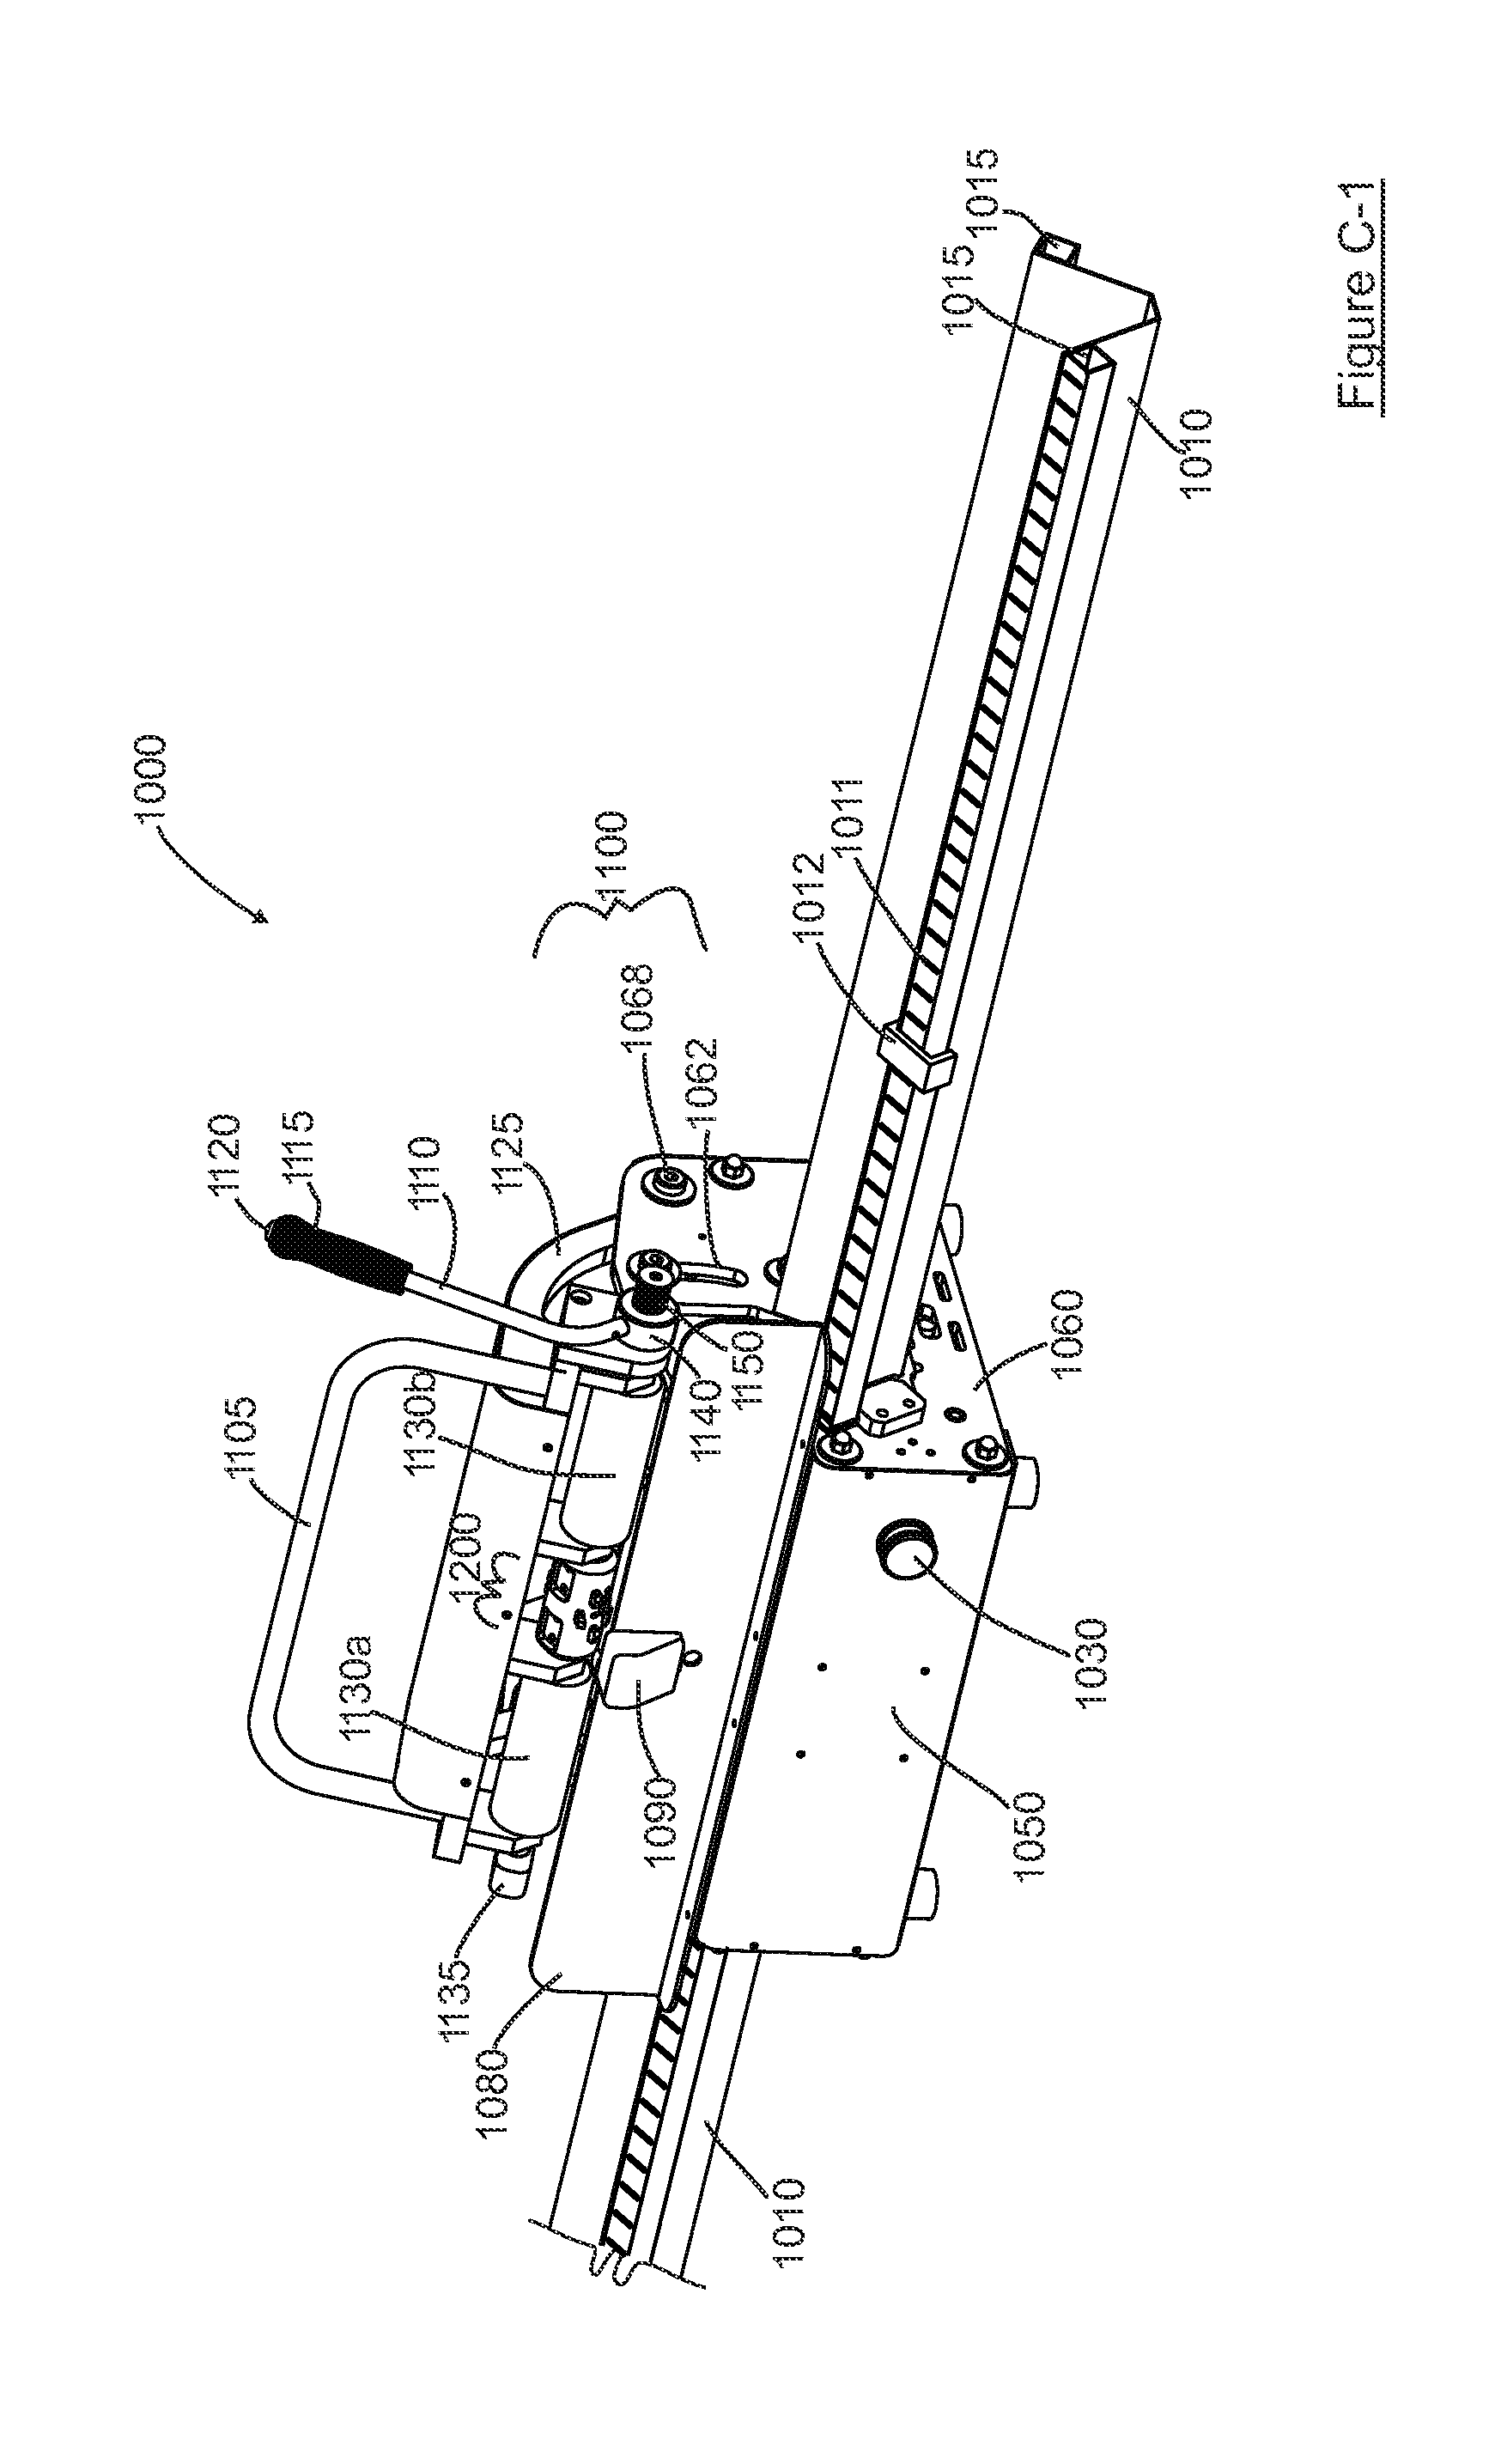 Pipe joining material for connecting pipes